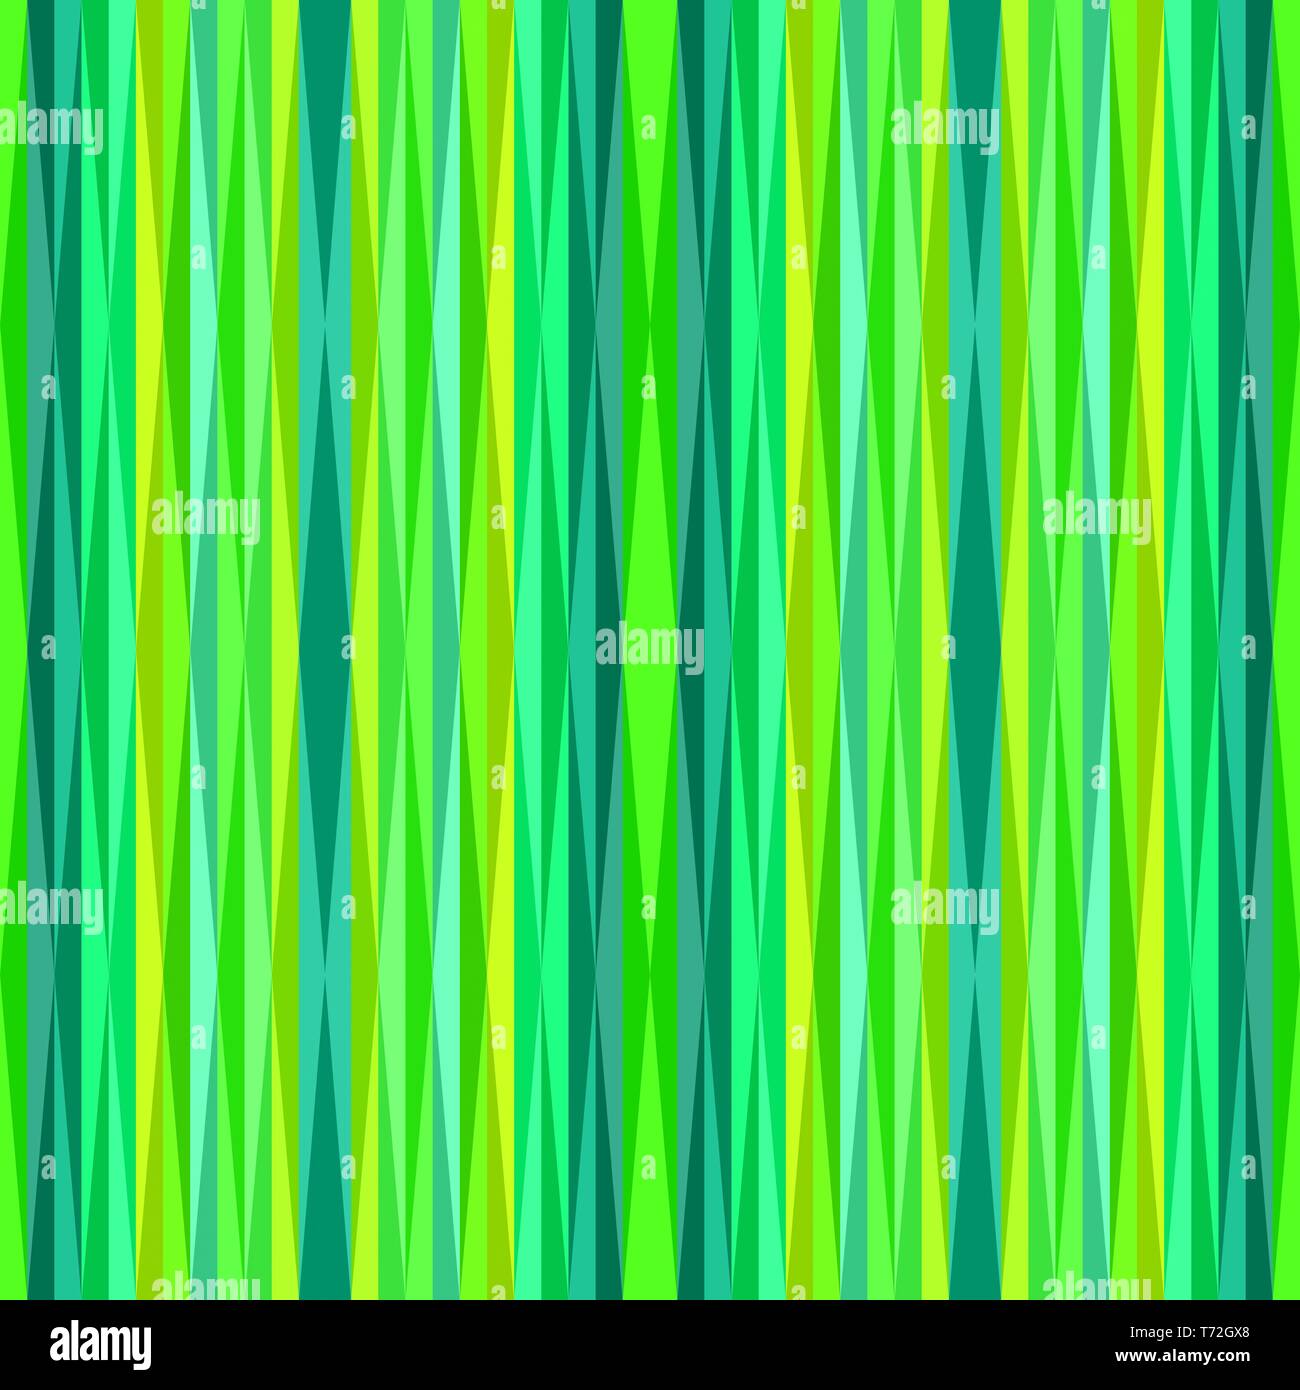 modern striped background with lime green, medium aqua marine and teal green  colors. for fashion garment, wrapping paper, wallpaper or creative design  Stock Photo - Alamy